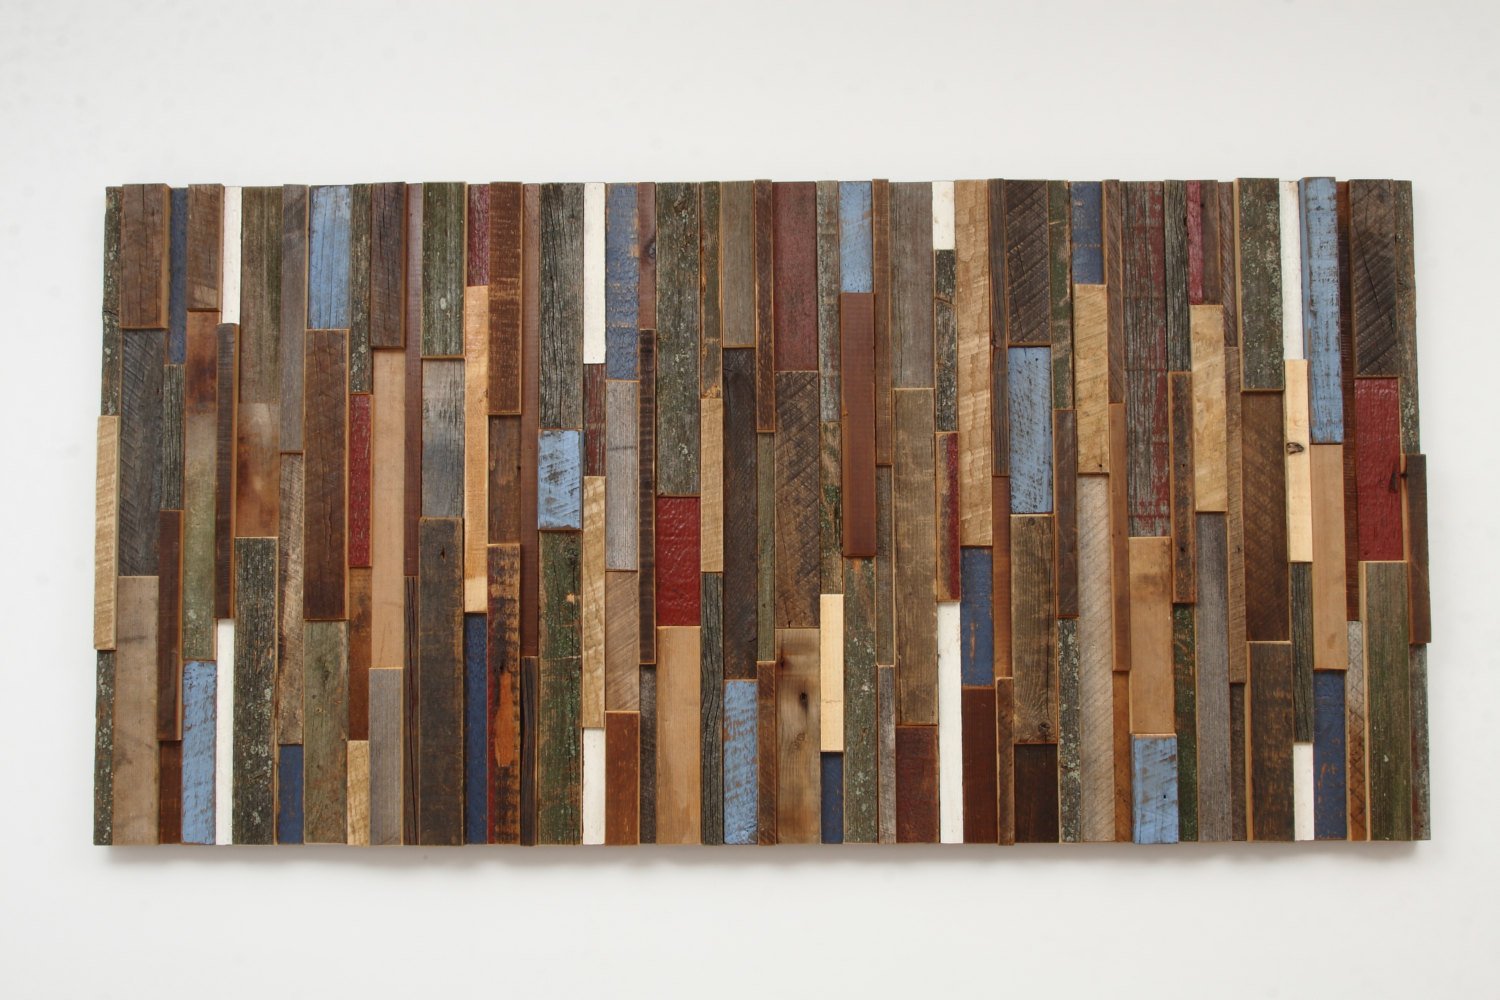 Outstanding Reclaimed Wood Wall Art - Style Motivation